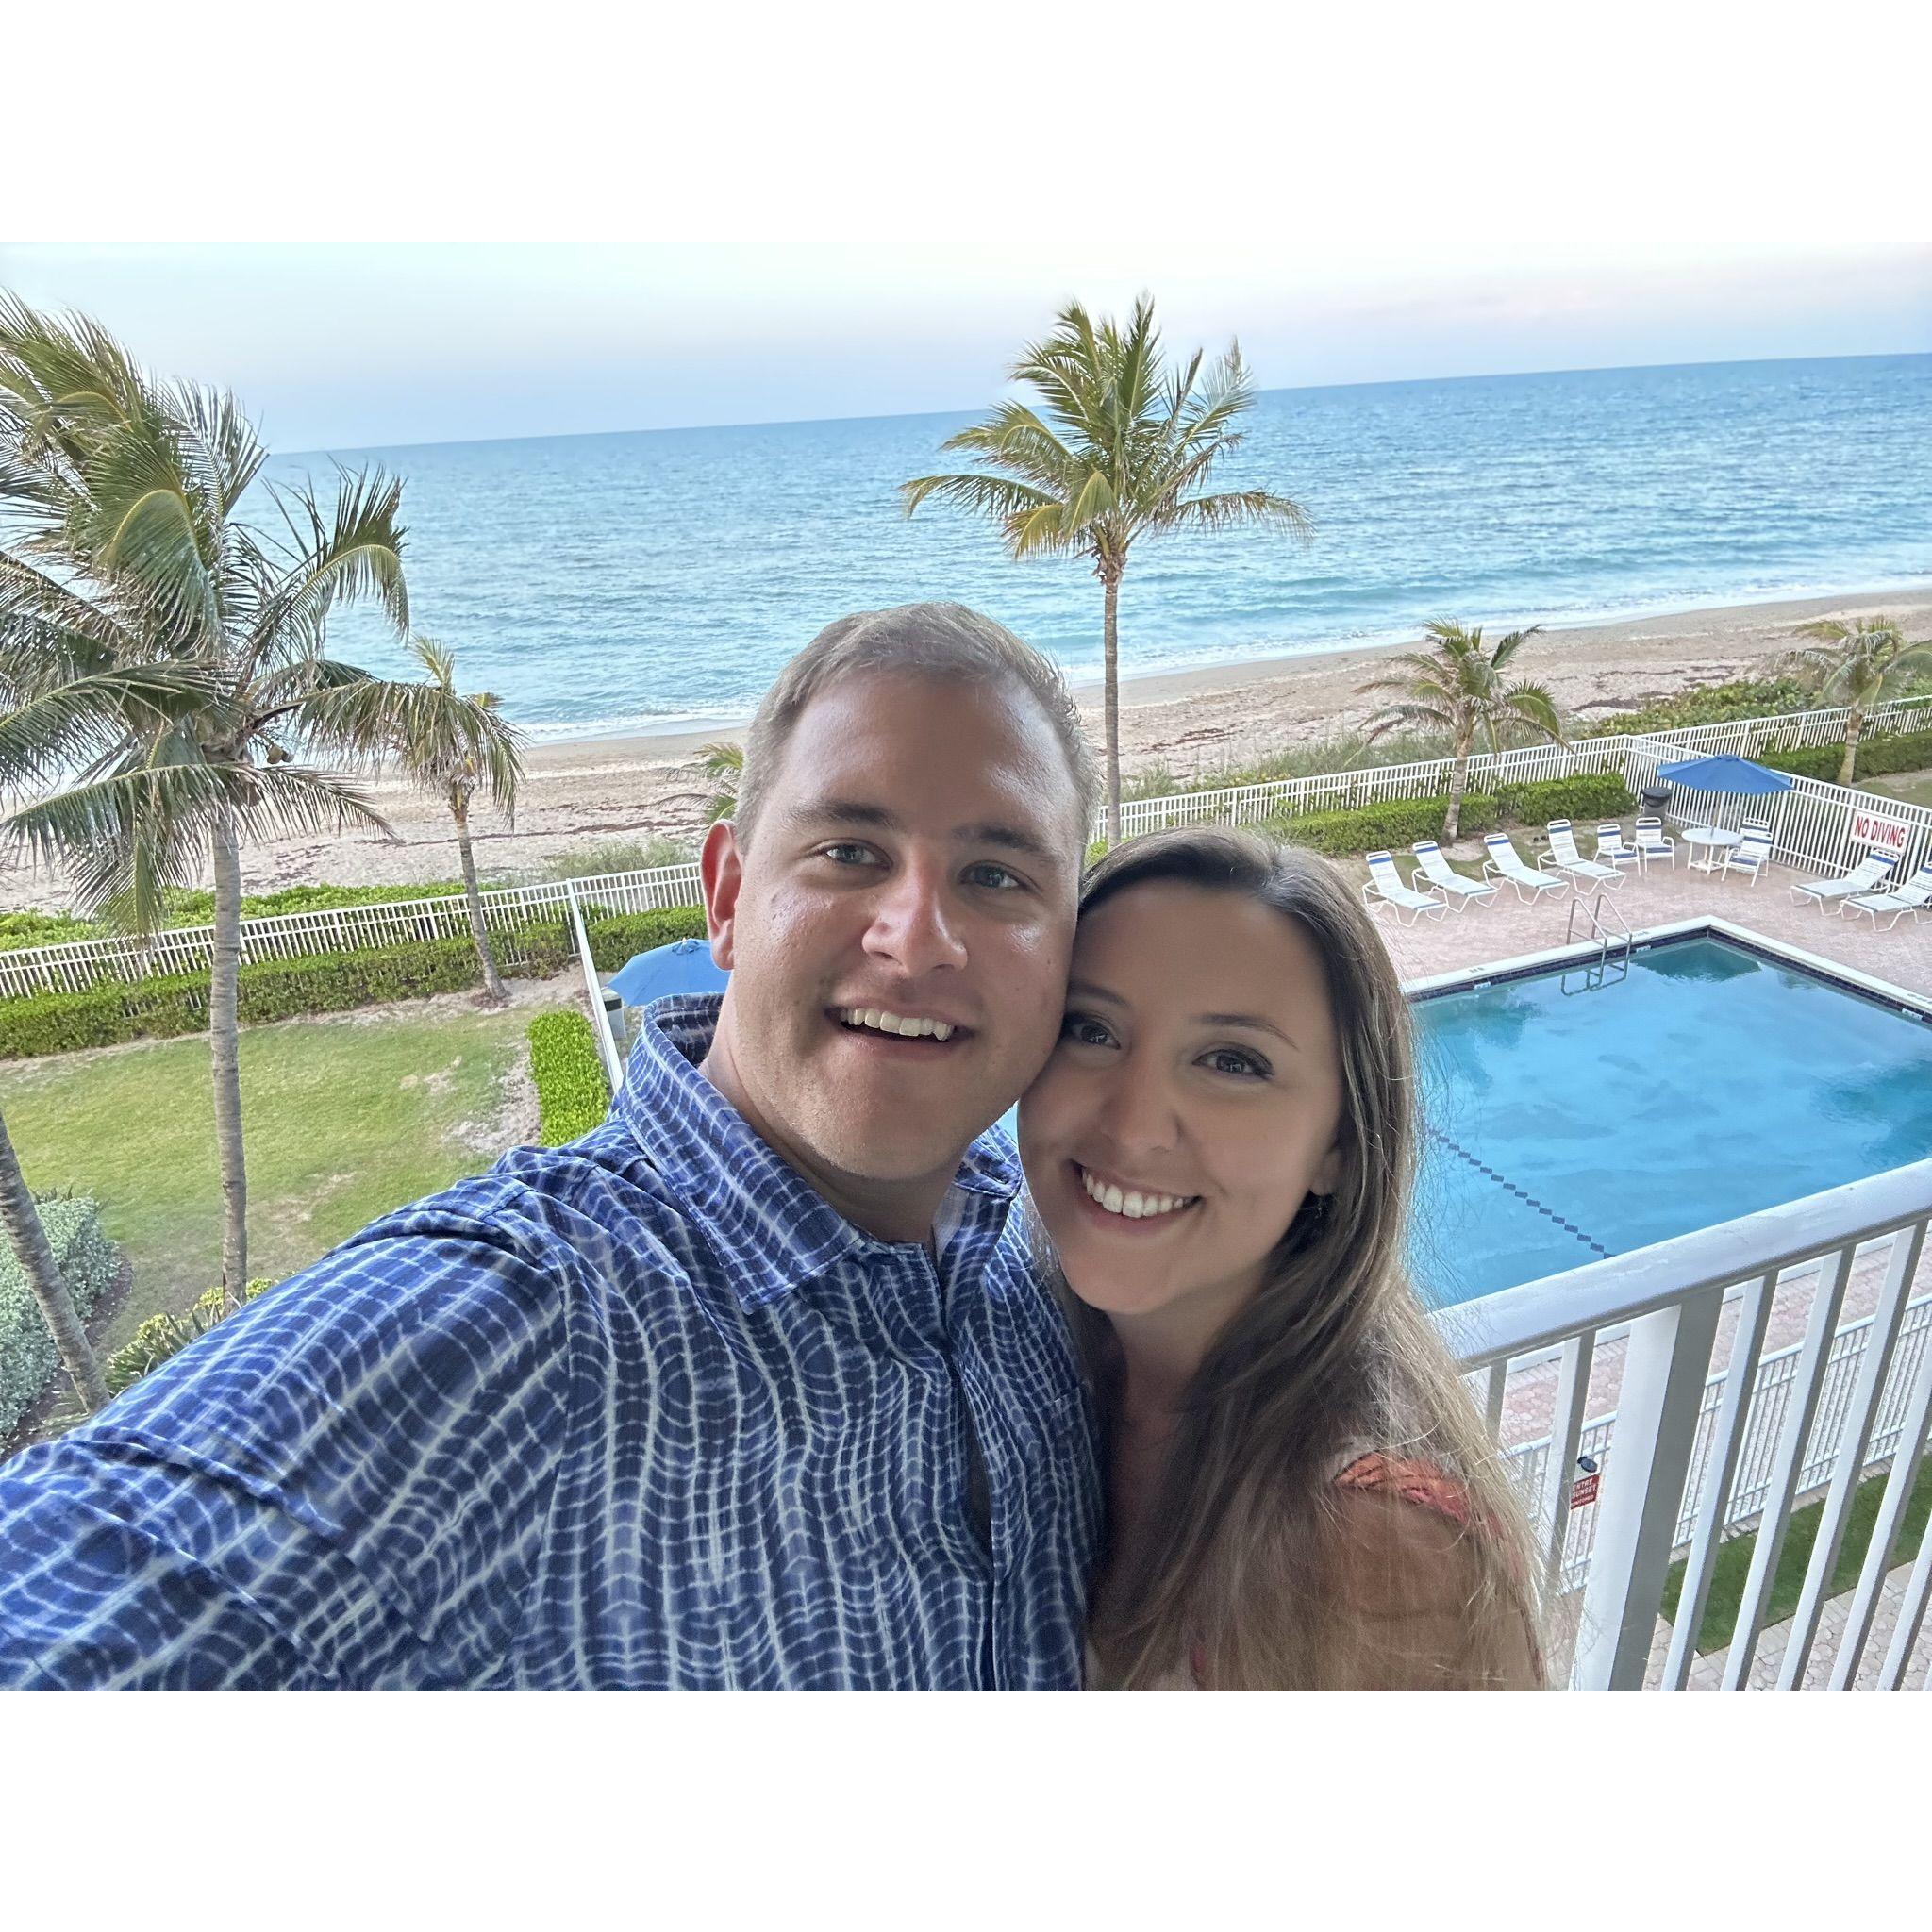 Fred takes Jordan on a romantic 'stay-cation' for her 28th birthday! The two enjoy a beach front condo in Hutchinson Island after they just said 'YES' to their wedding venue!